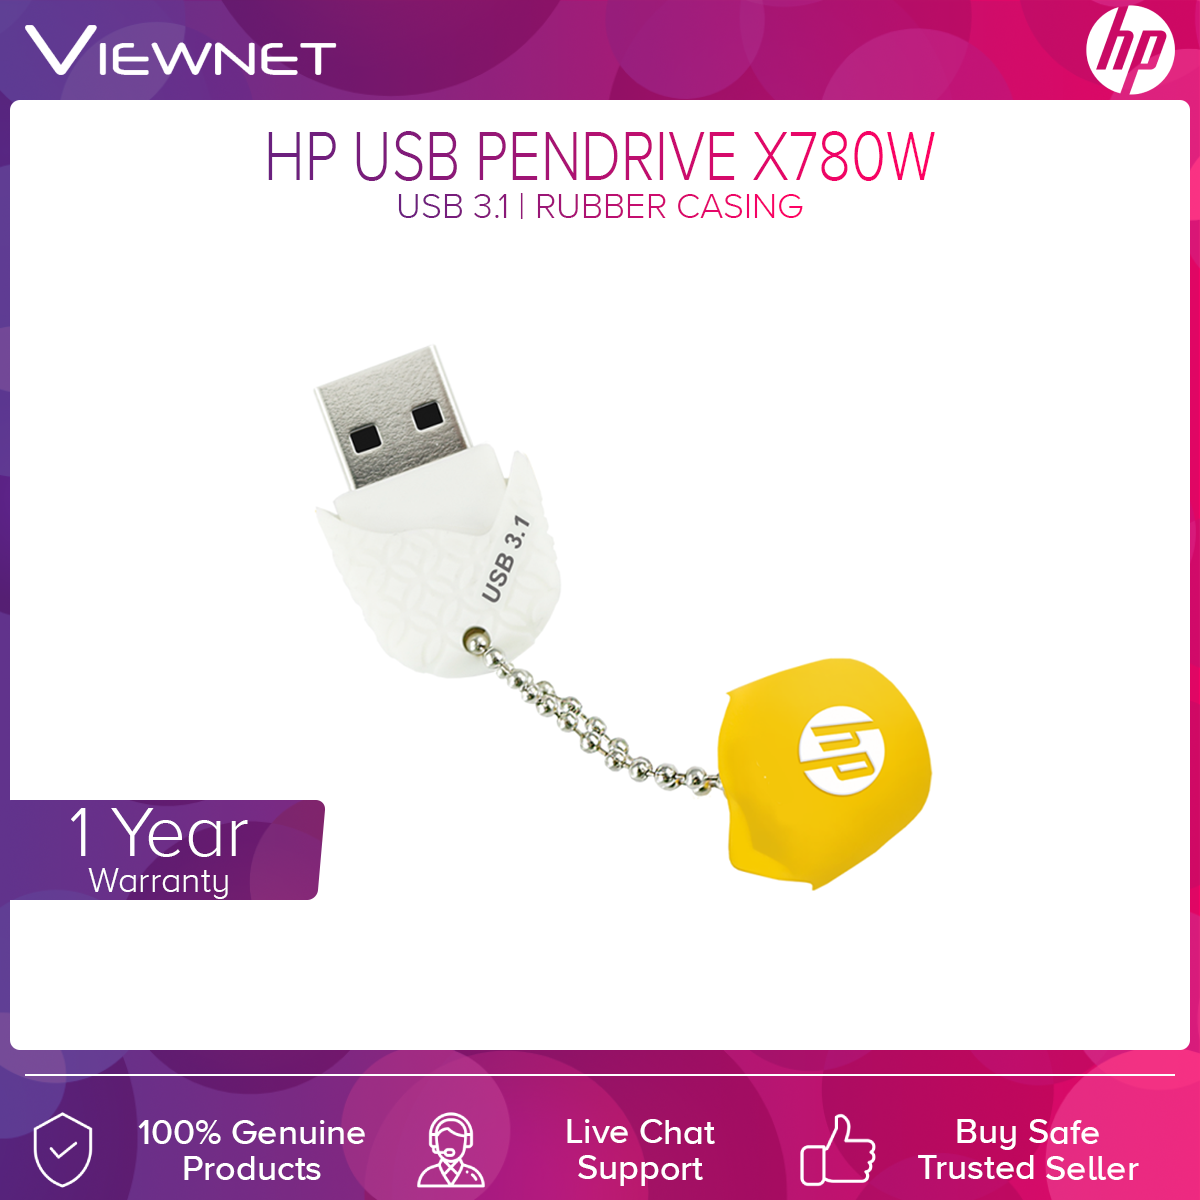 HP USB Pendrive X780W with USB 3.1 Connection, Rubber Casing, Cap Holder